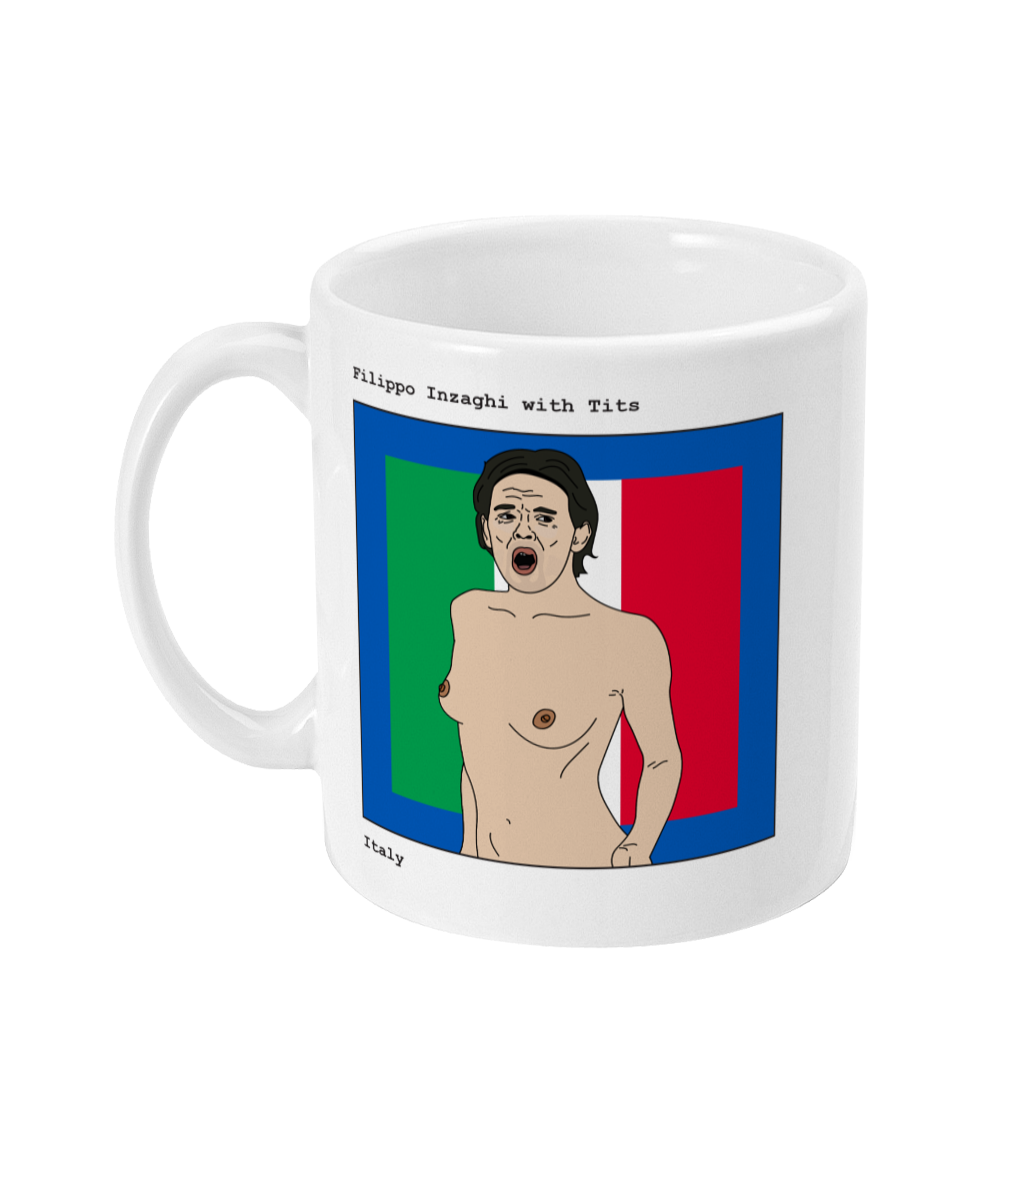 Filippo Inzaghi with Tits